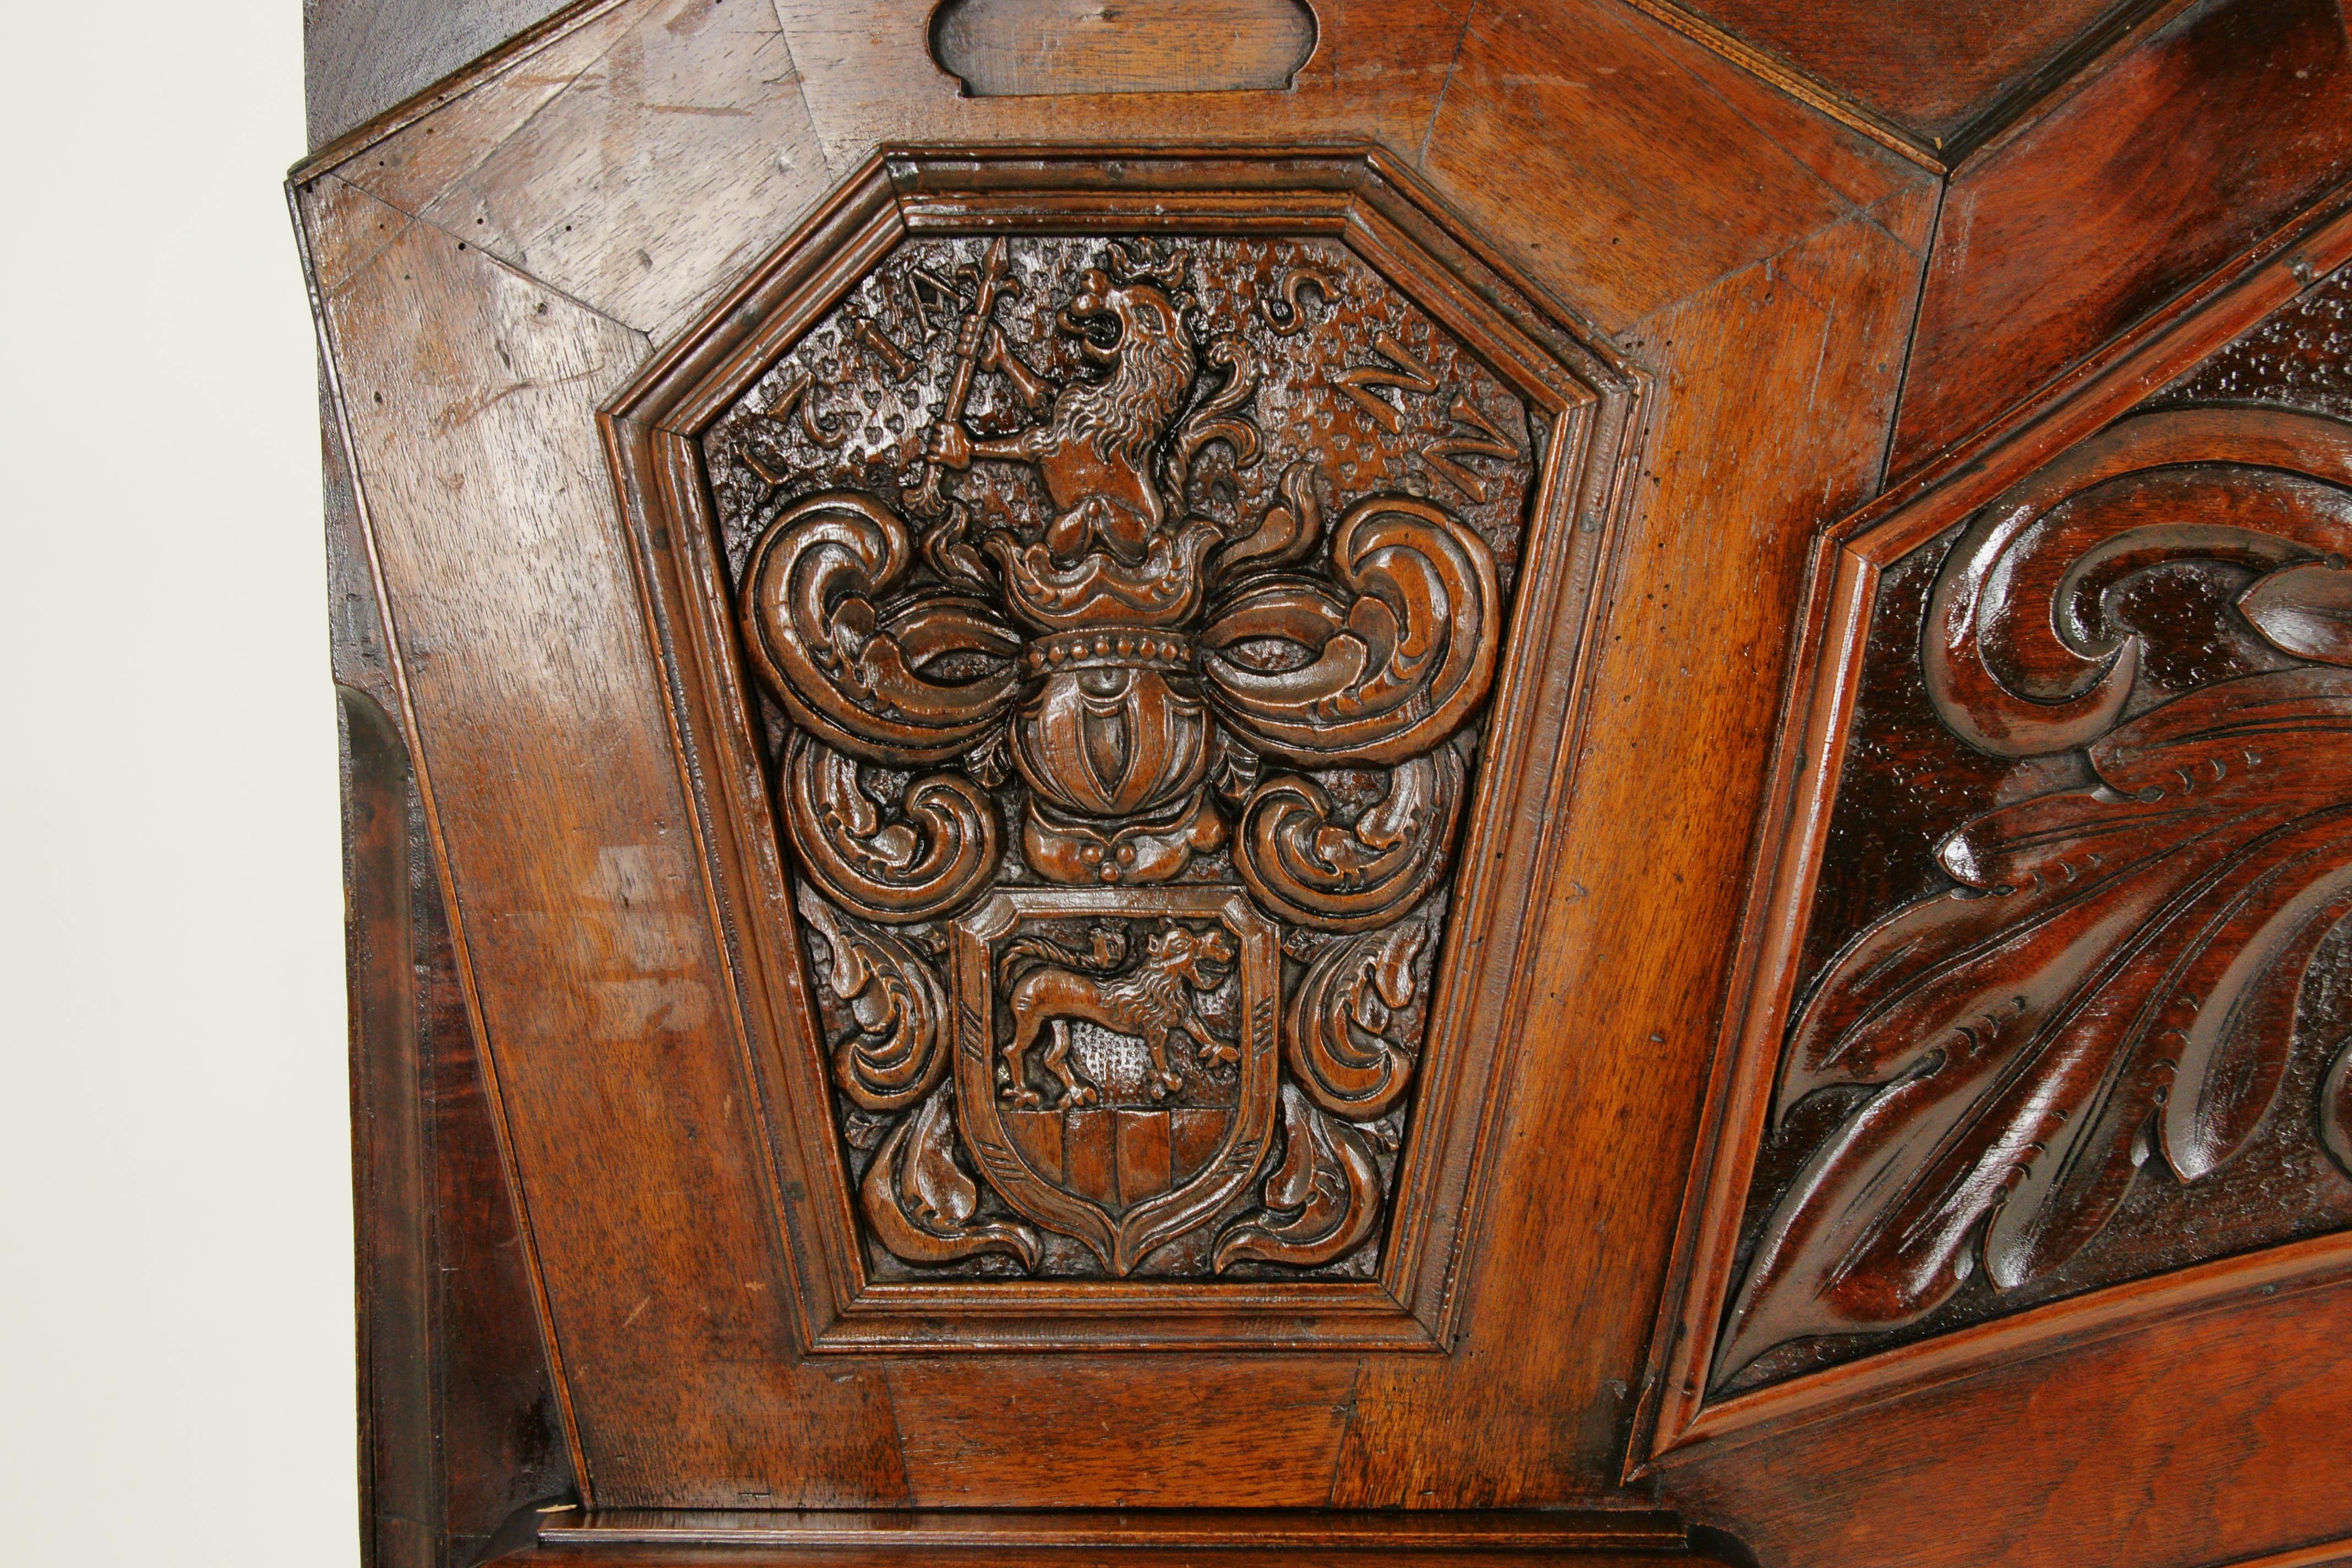 Fireplace surround, fireplace mantle, carved walnut mantle, Scotland 1920, Antique Furniture, B1522

Scotland, 1920
Carved walnut
Original finish
Solid walnut and veneers
Floral carvings to the front with coats of arms at either end
Plain